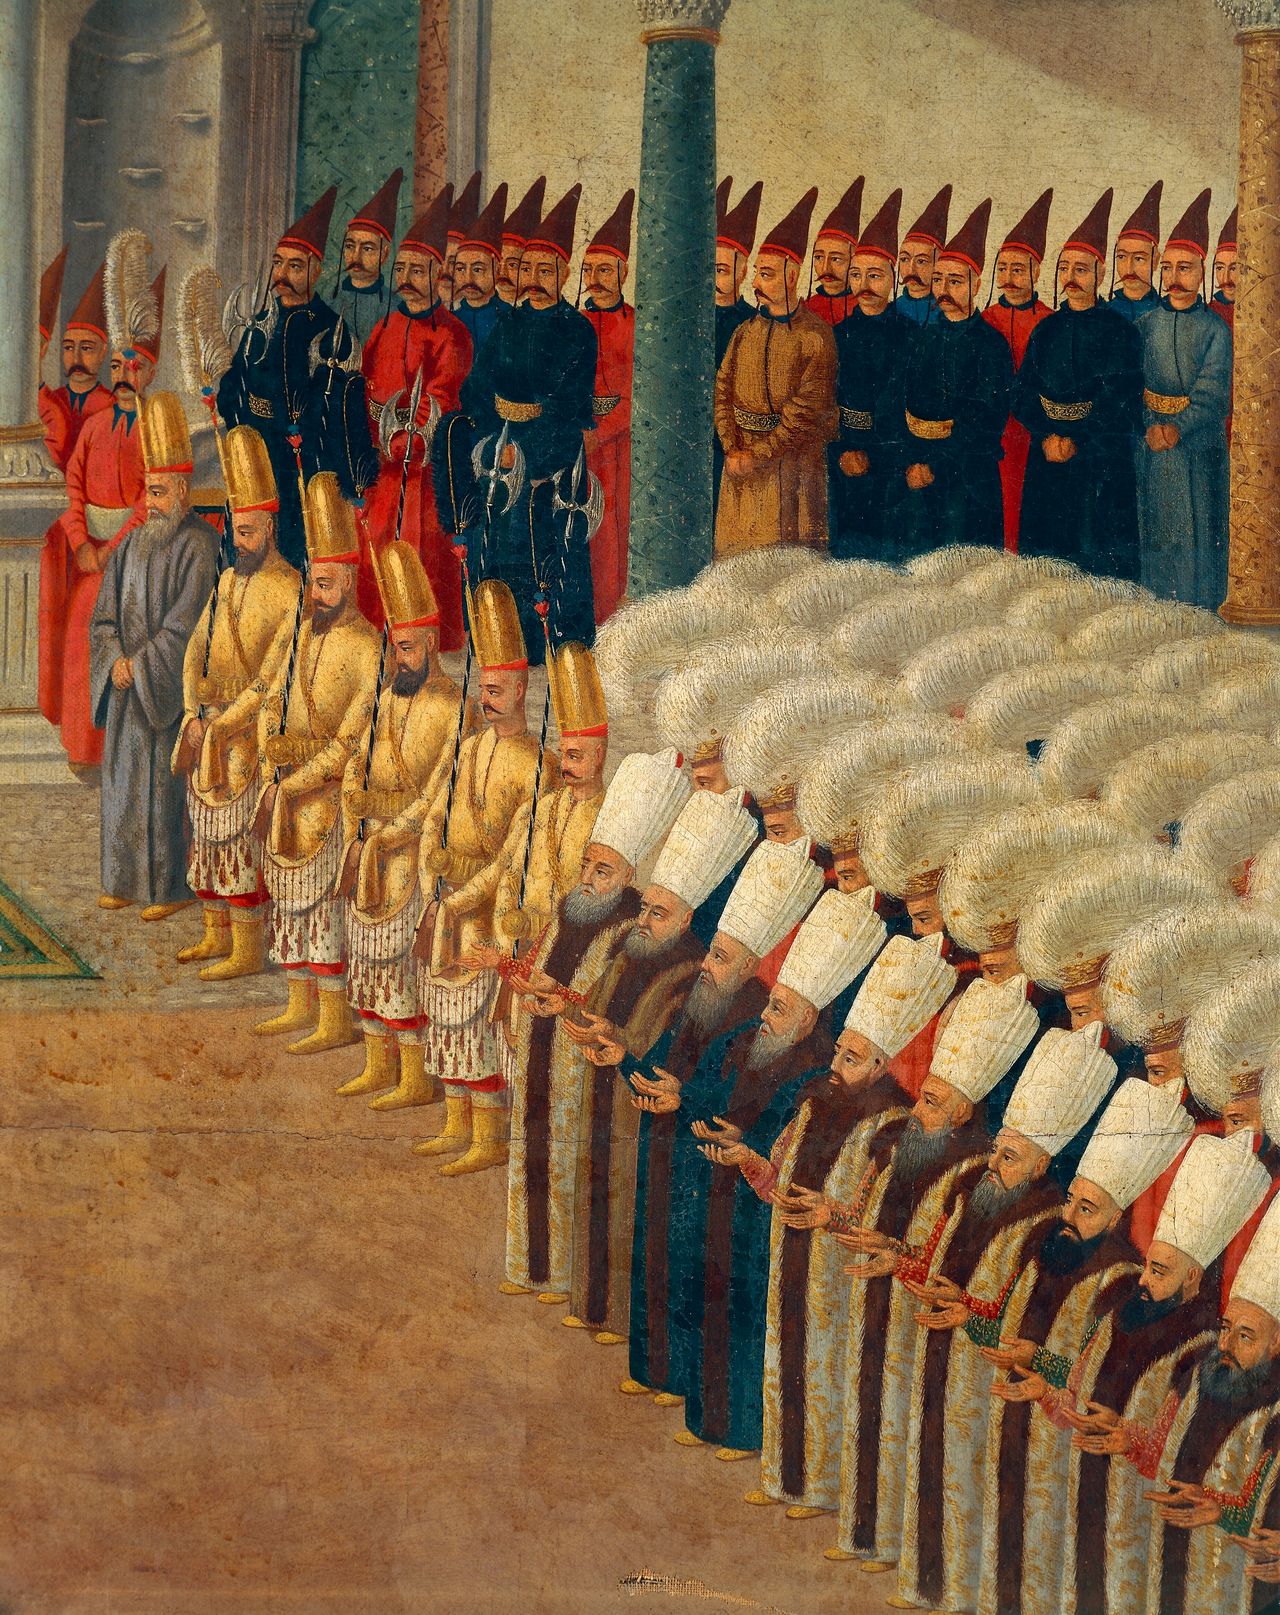 The guard of Janissaries,Turkey, 18th century. (Photo by DeAgostini/Getty Images)